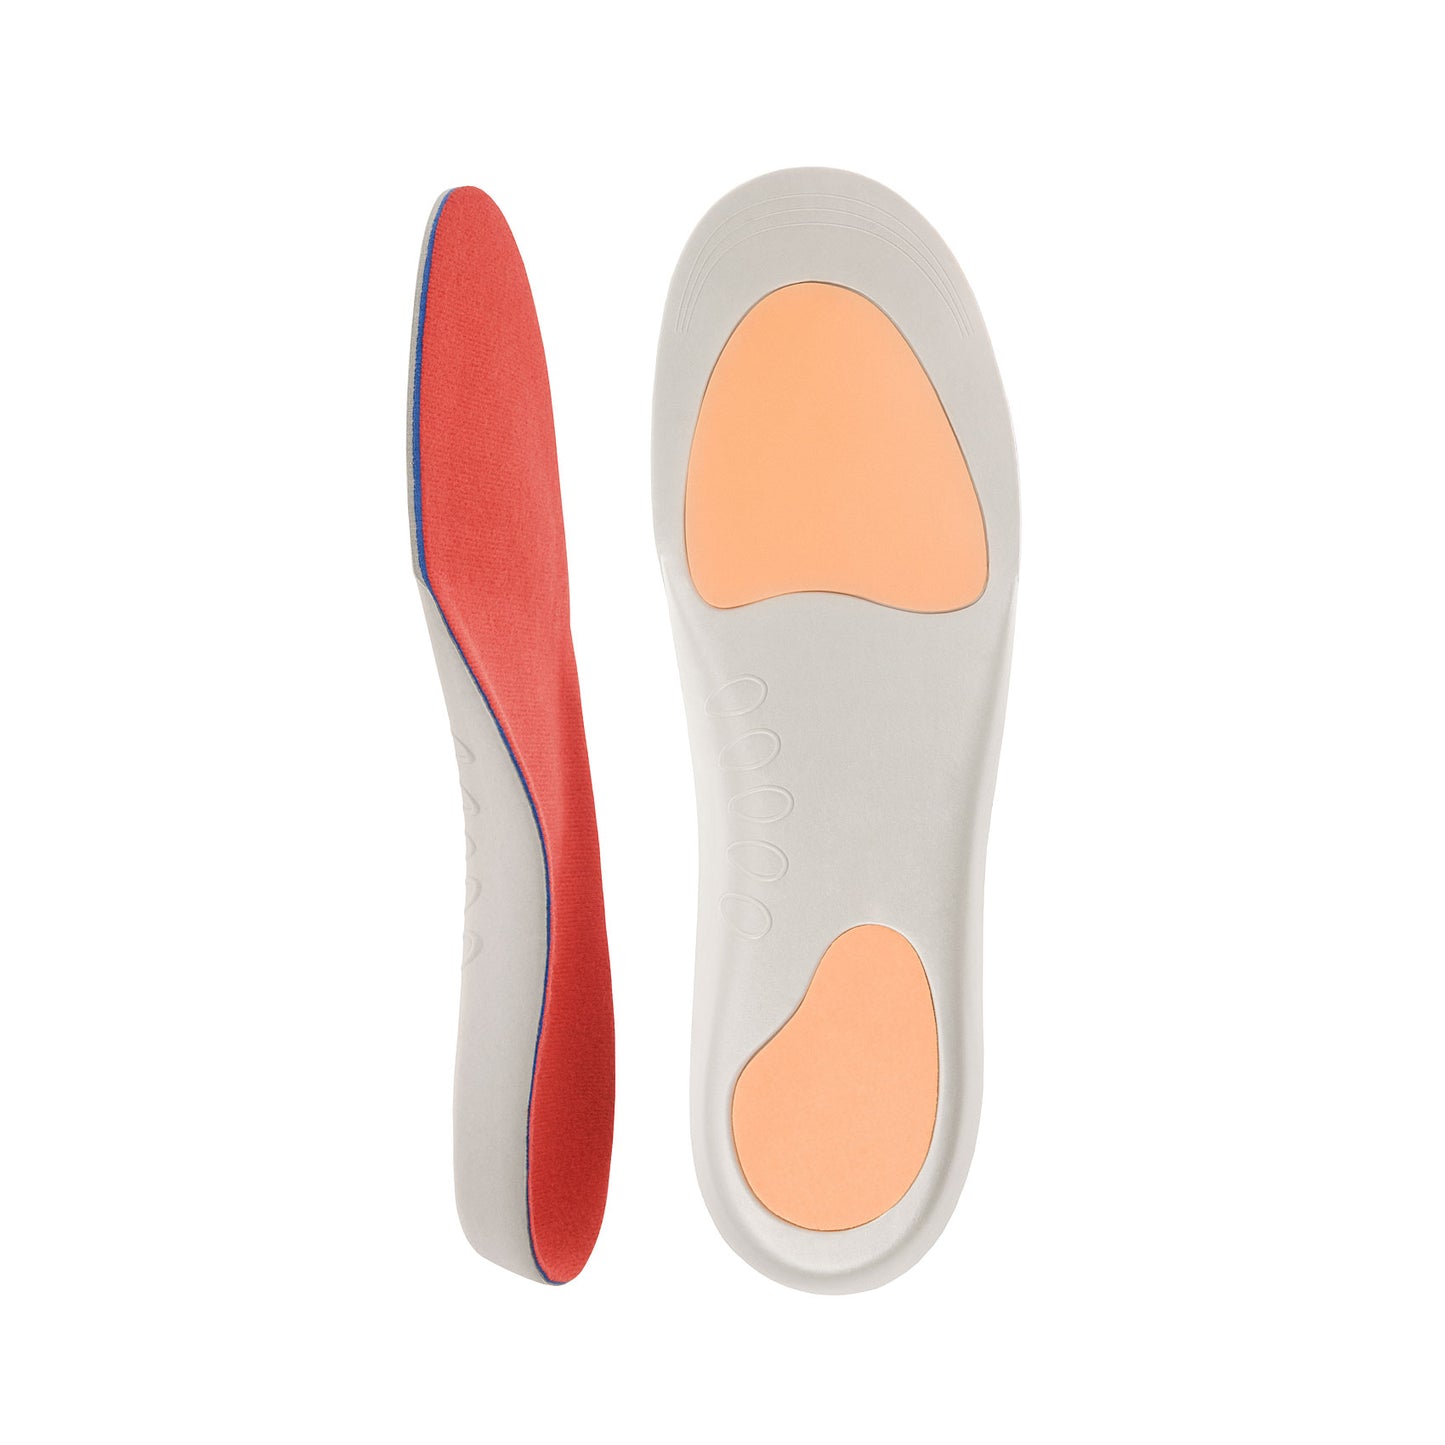 DJMed Orthotic - Shoe Insoles - Mens 7.5-9